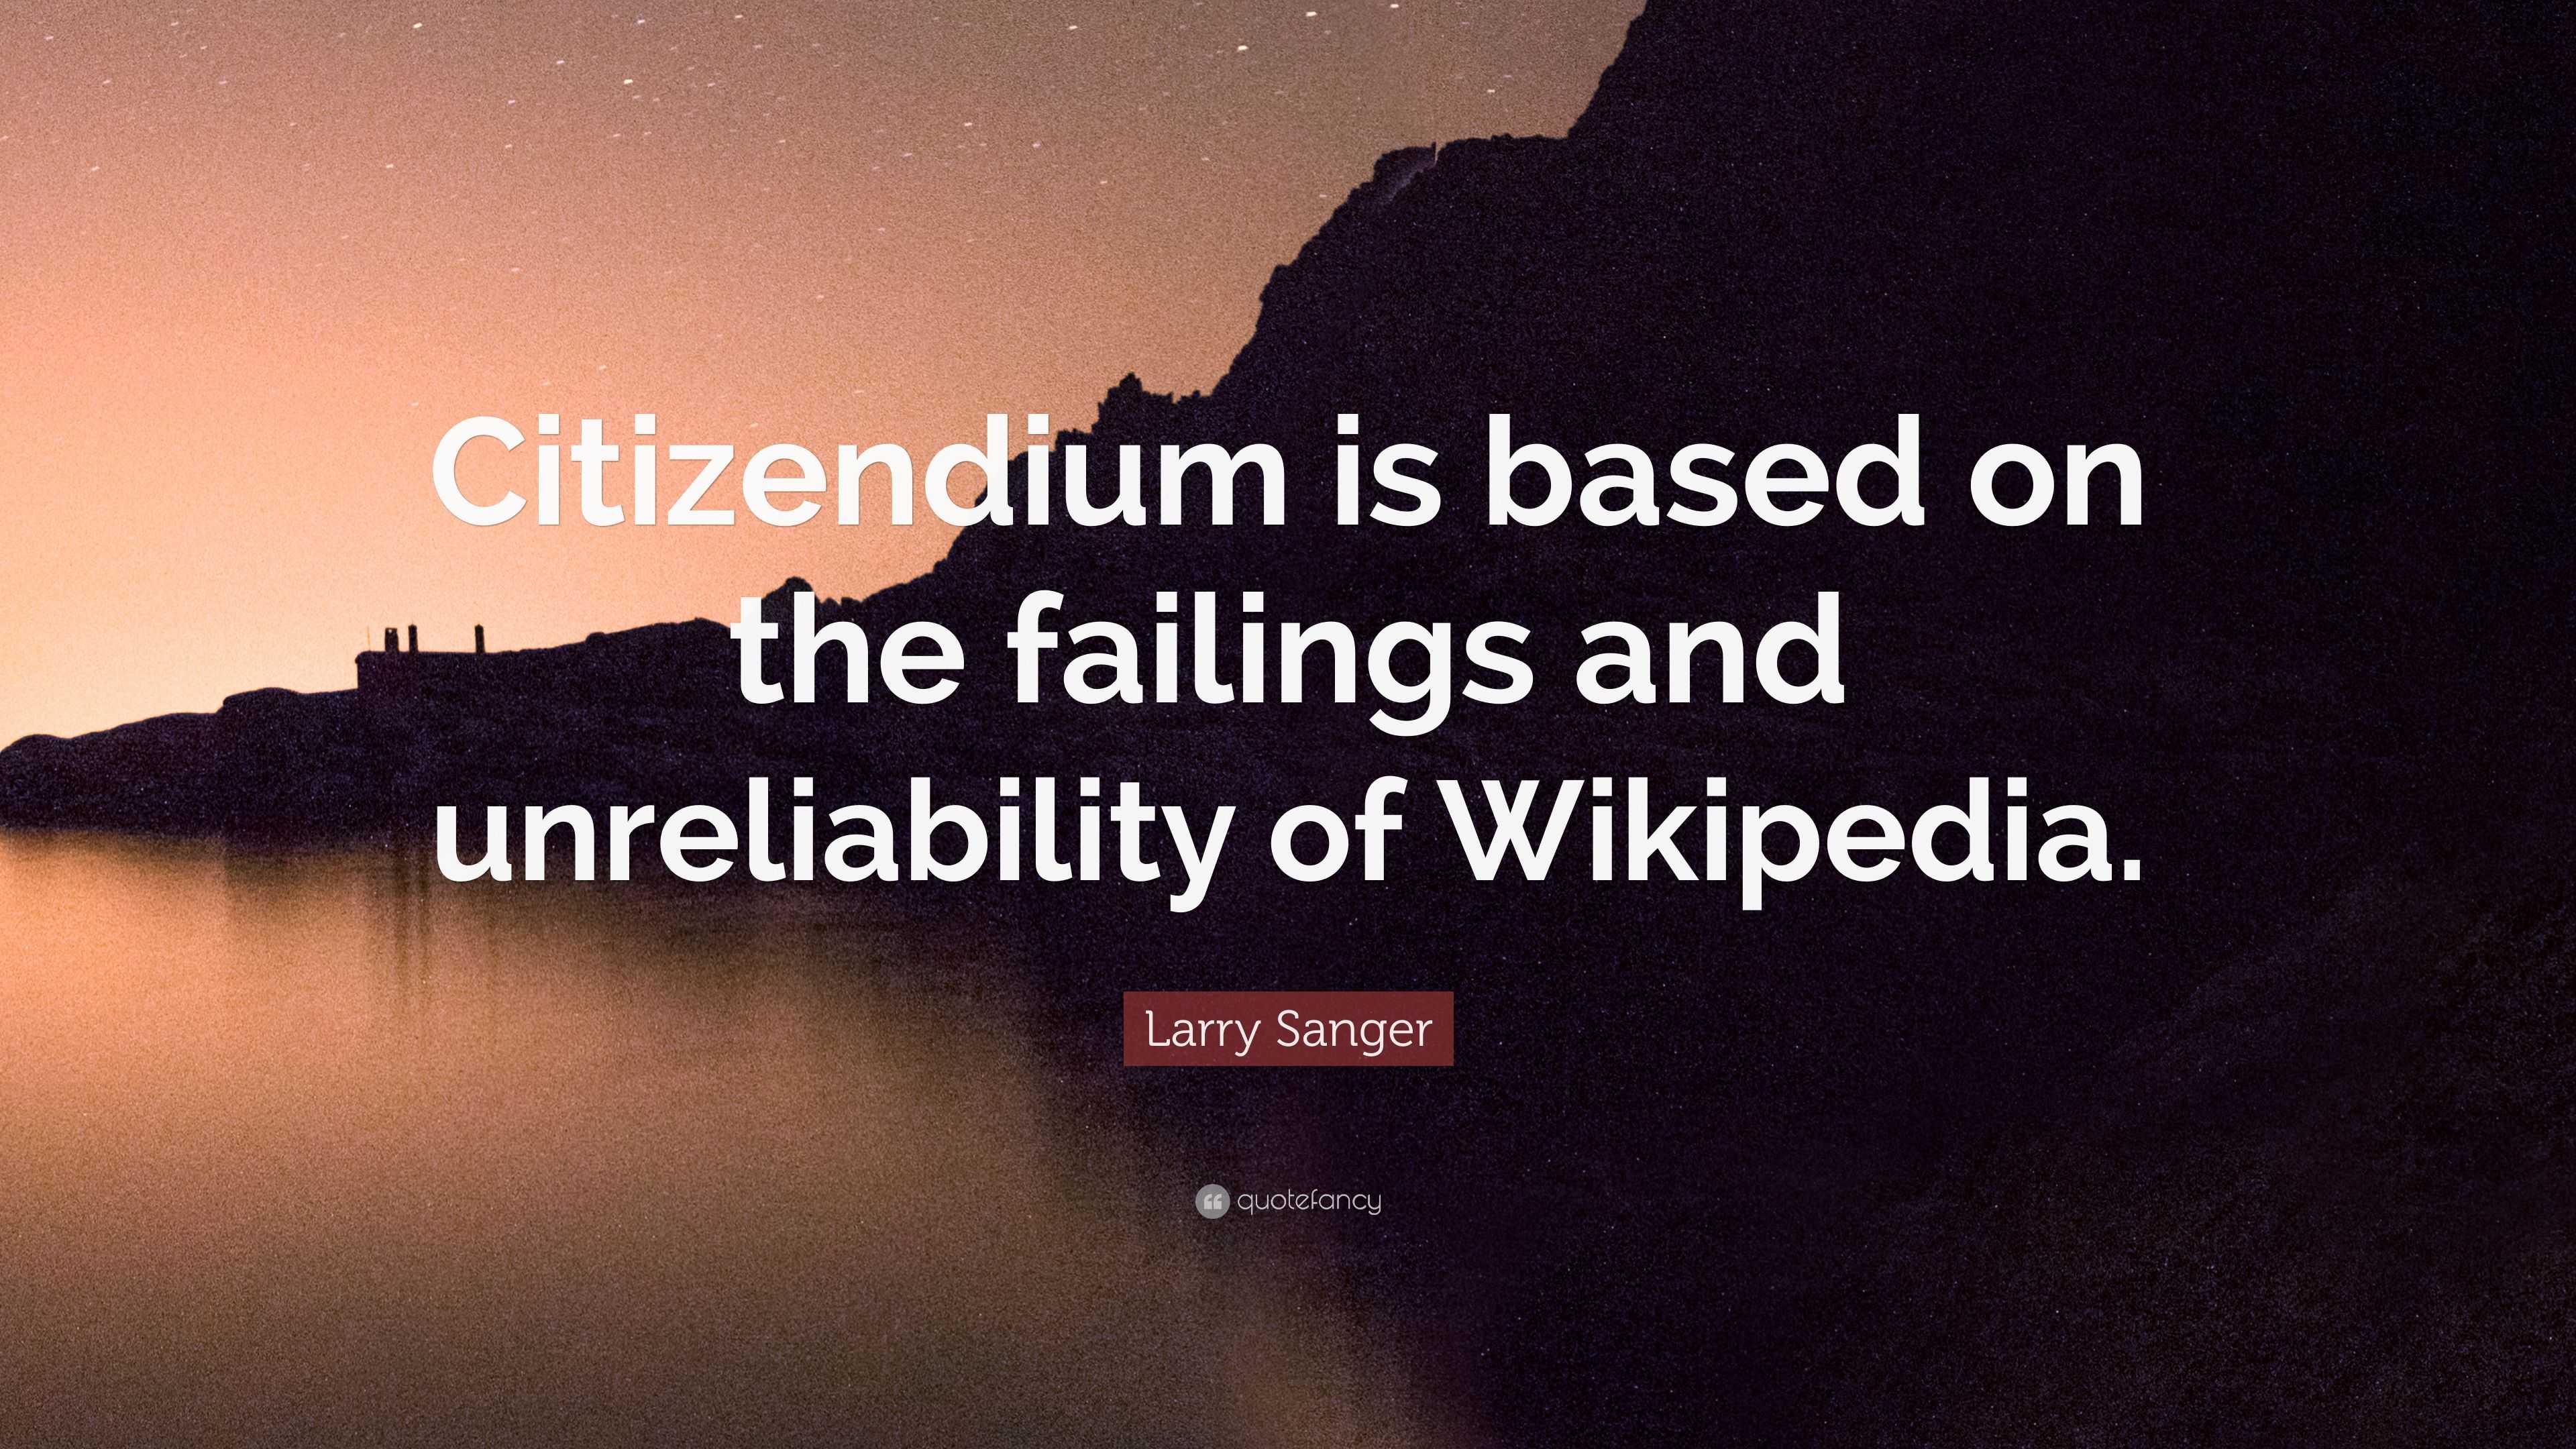 Larry Sanger Quote: “Citizendium is based on the failings and unreliability  of Wikipedia.”